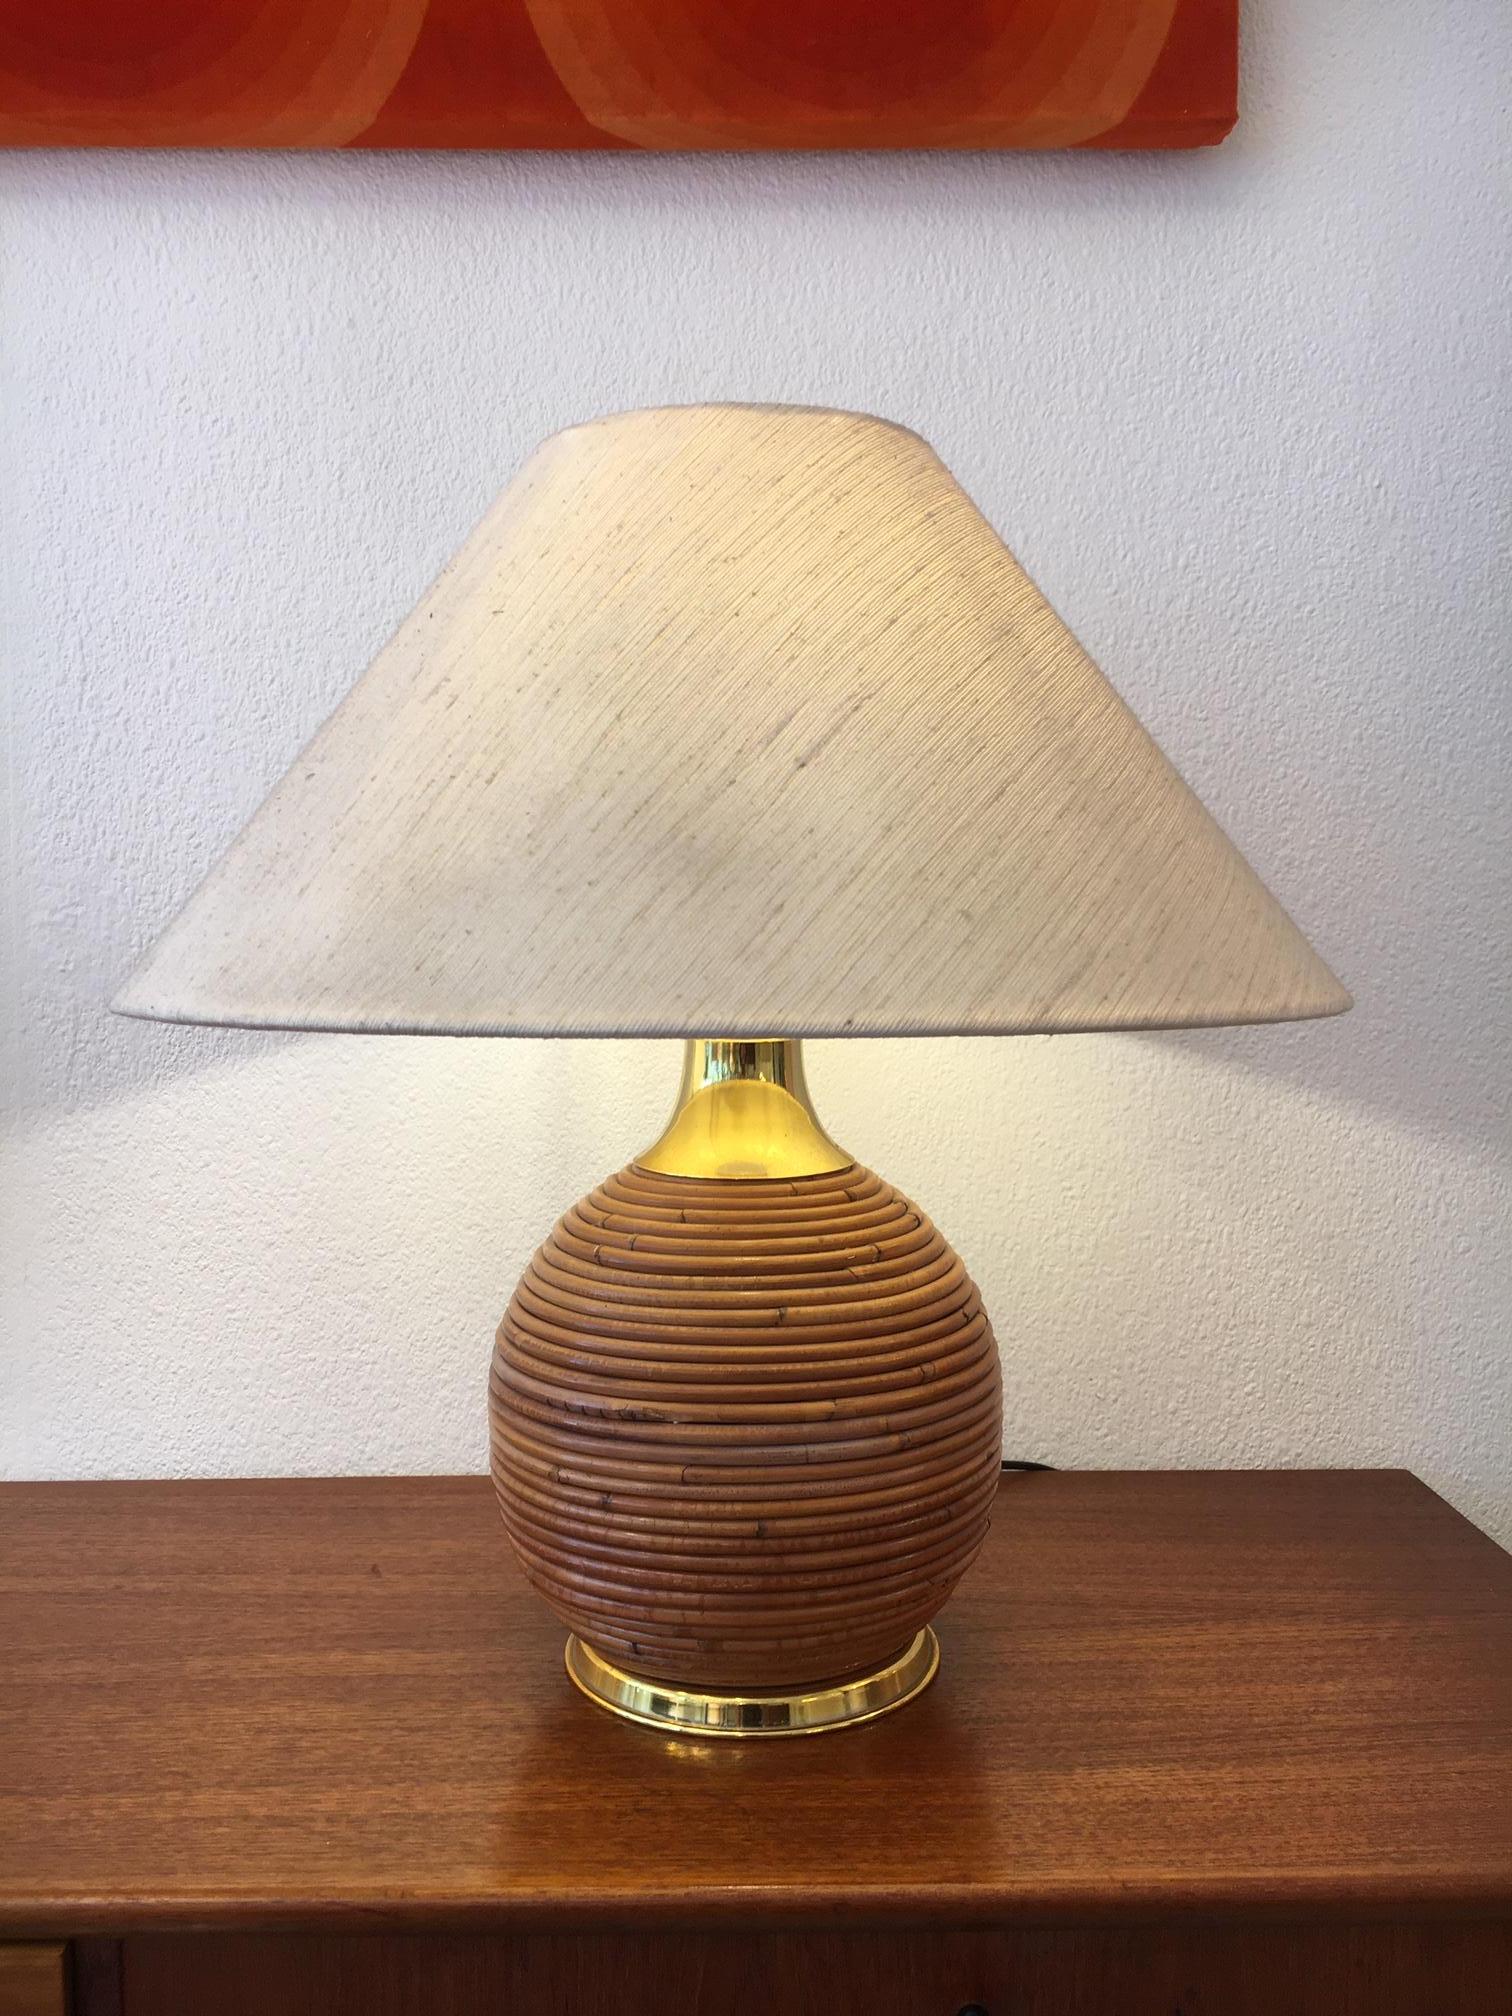 Vintage brass and bamboo table lamp, 1970s
In the manner of Tommaso Barbi creations.